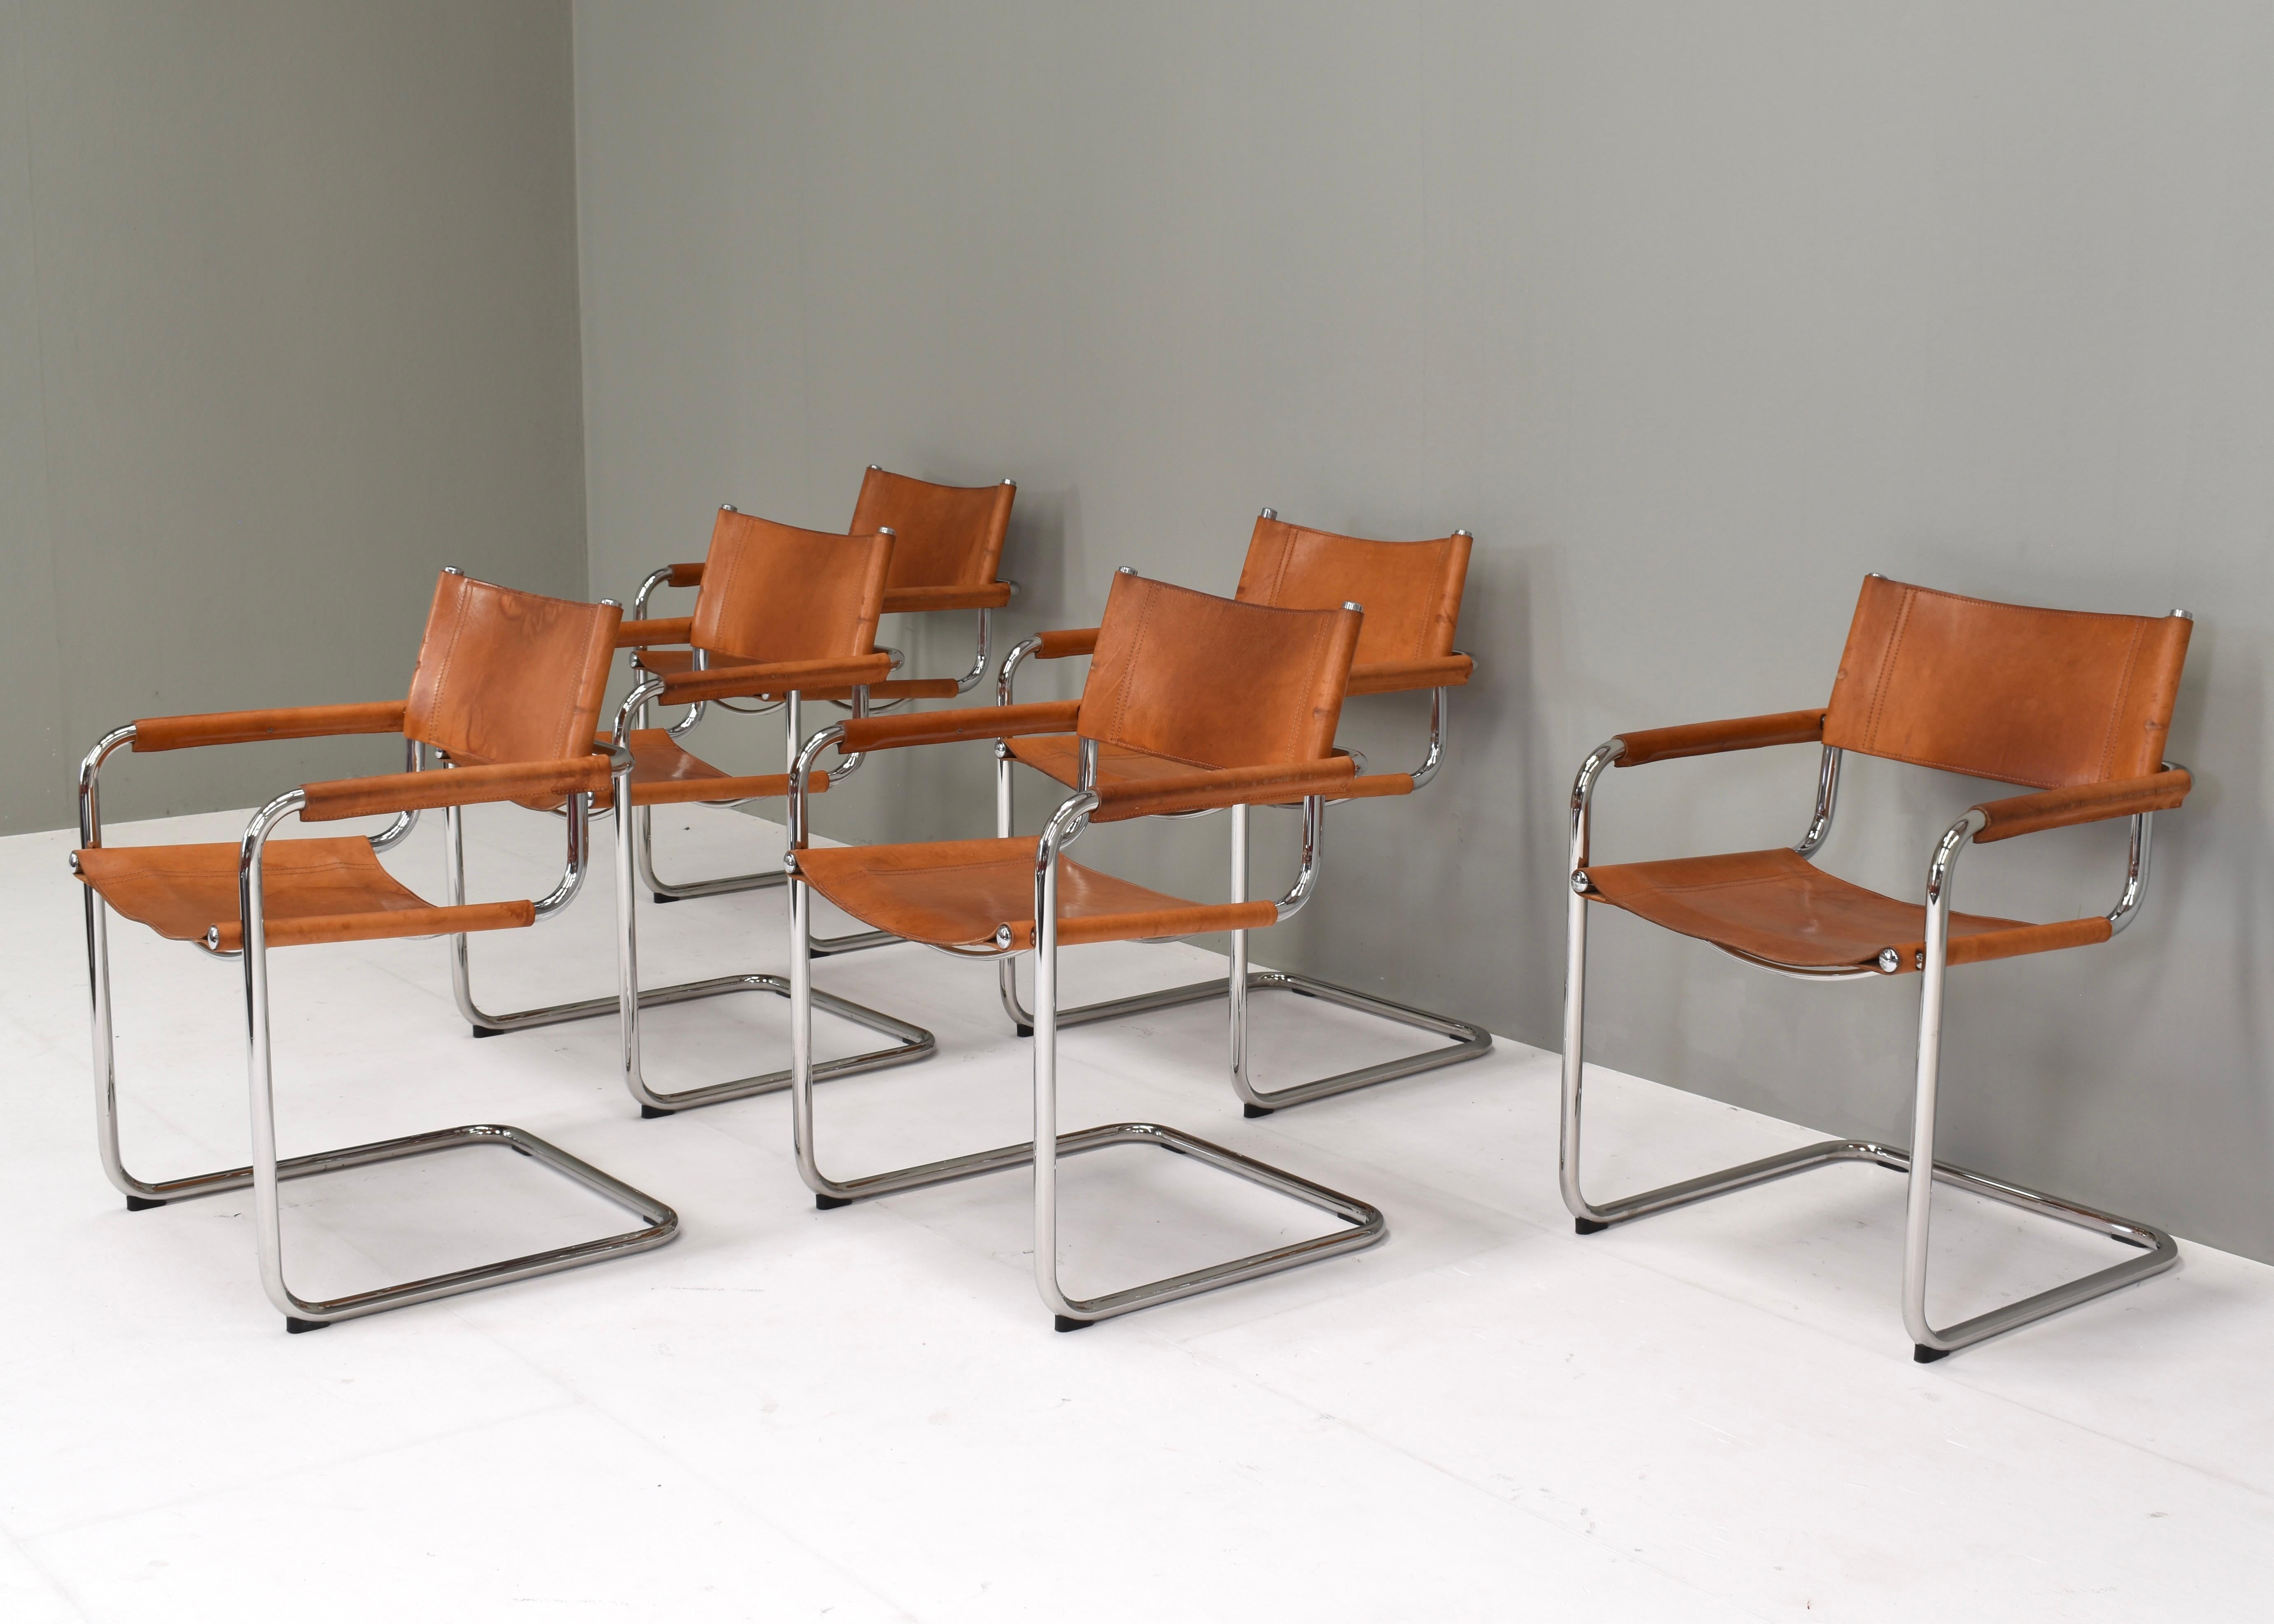 Set of six very comfortable Mart Stam S34 dining armchairs by Fasem – Italy, circa 1960. Rare find in a set of 6 with original tan saddle leather.
The leather has a beautiful tan cognac colour with patina that only comes with age. 
All chairs